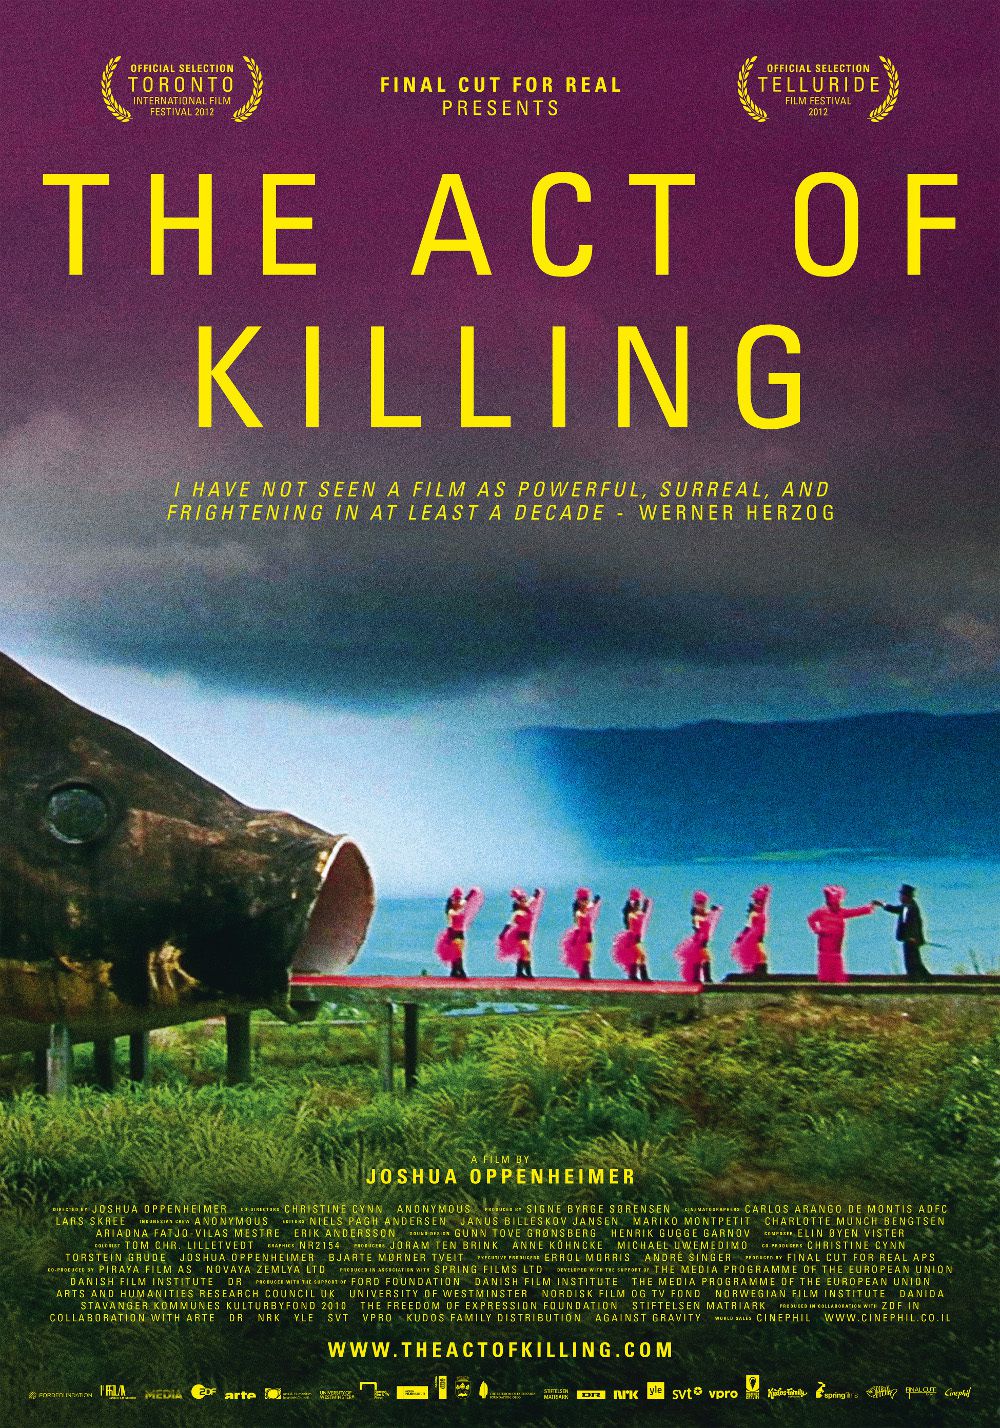 The Act of Killing - Documentaire (2013) streaming VF gratuit complet